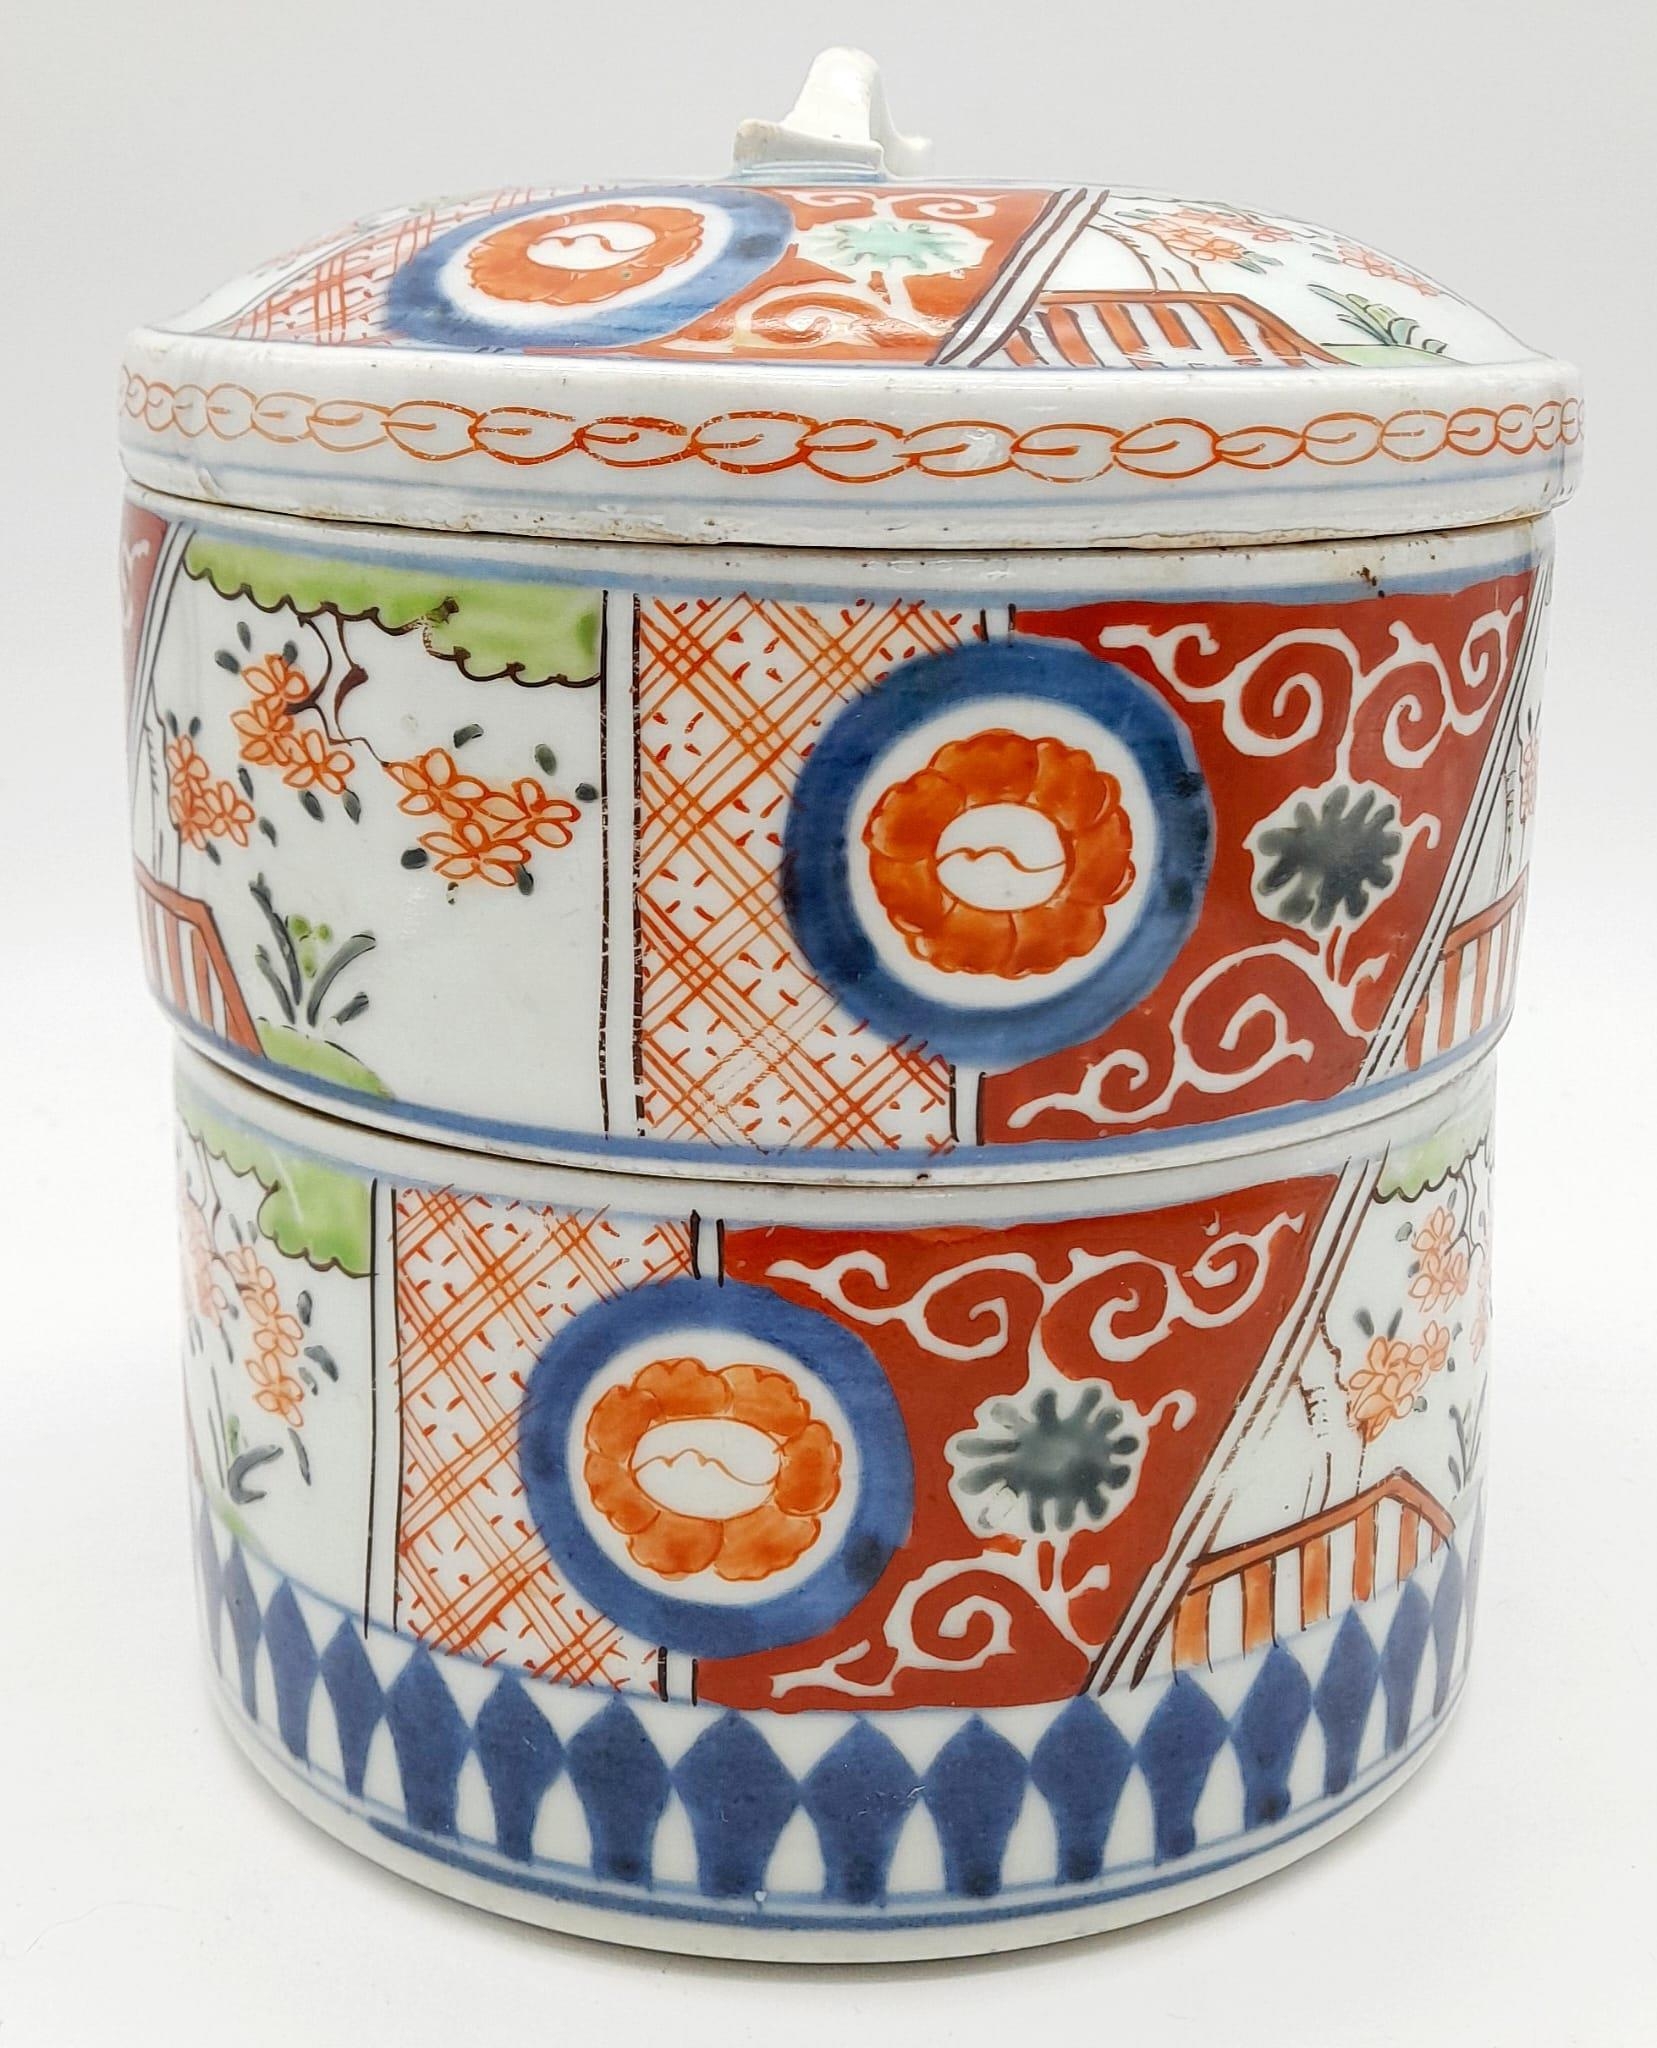 A Superb Antique (Mid 19th century) Japanese Double Tier Box with Lid. Wonderful colours in the - Image 2 of 4